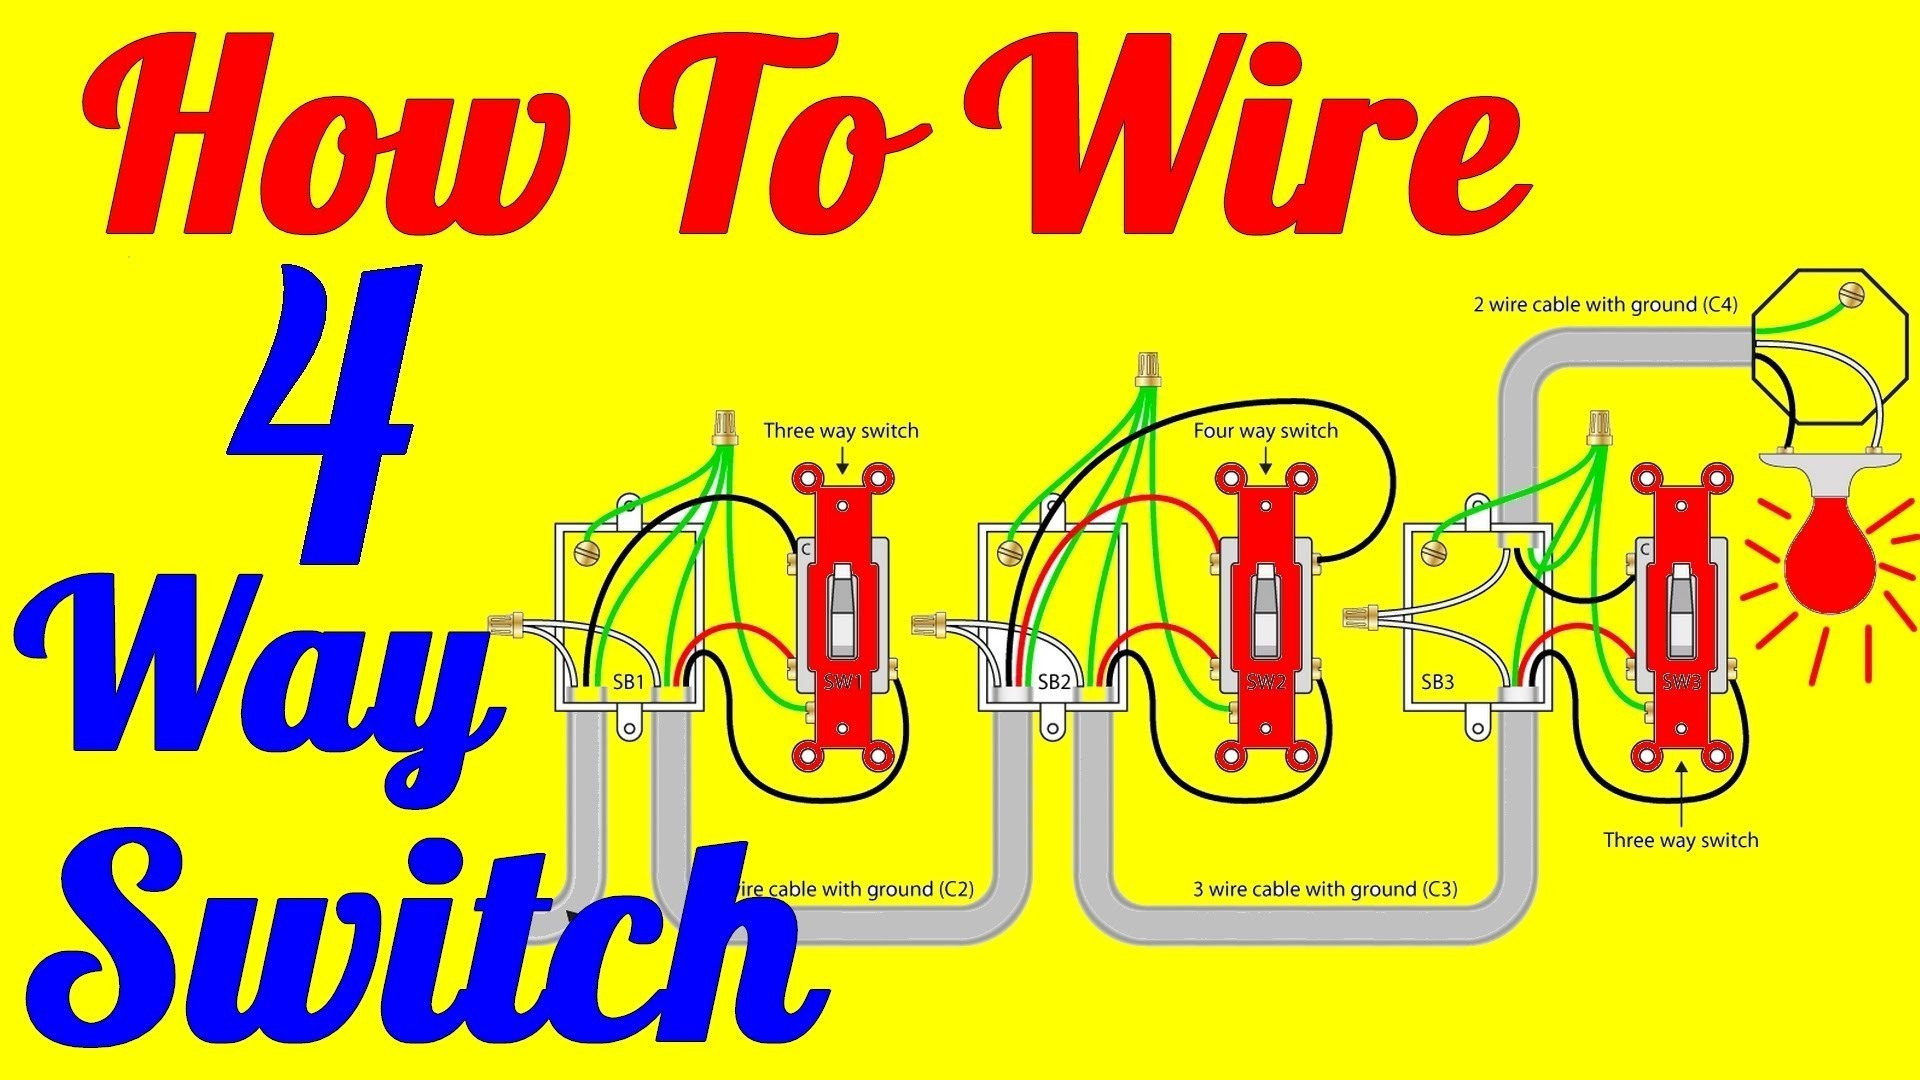 Wiring Diagram For Four Way Switch Rate Inspirational 4 Way Switch - 4 Way Switch Wiring Diagram Pdf